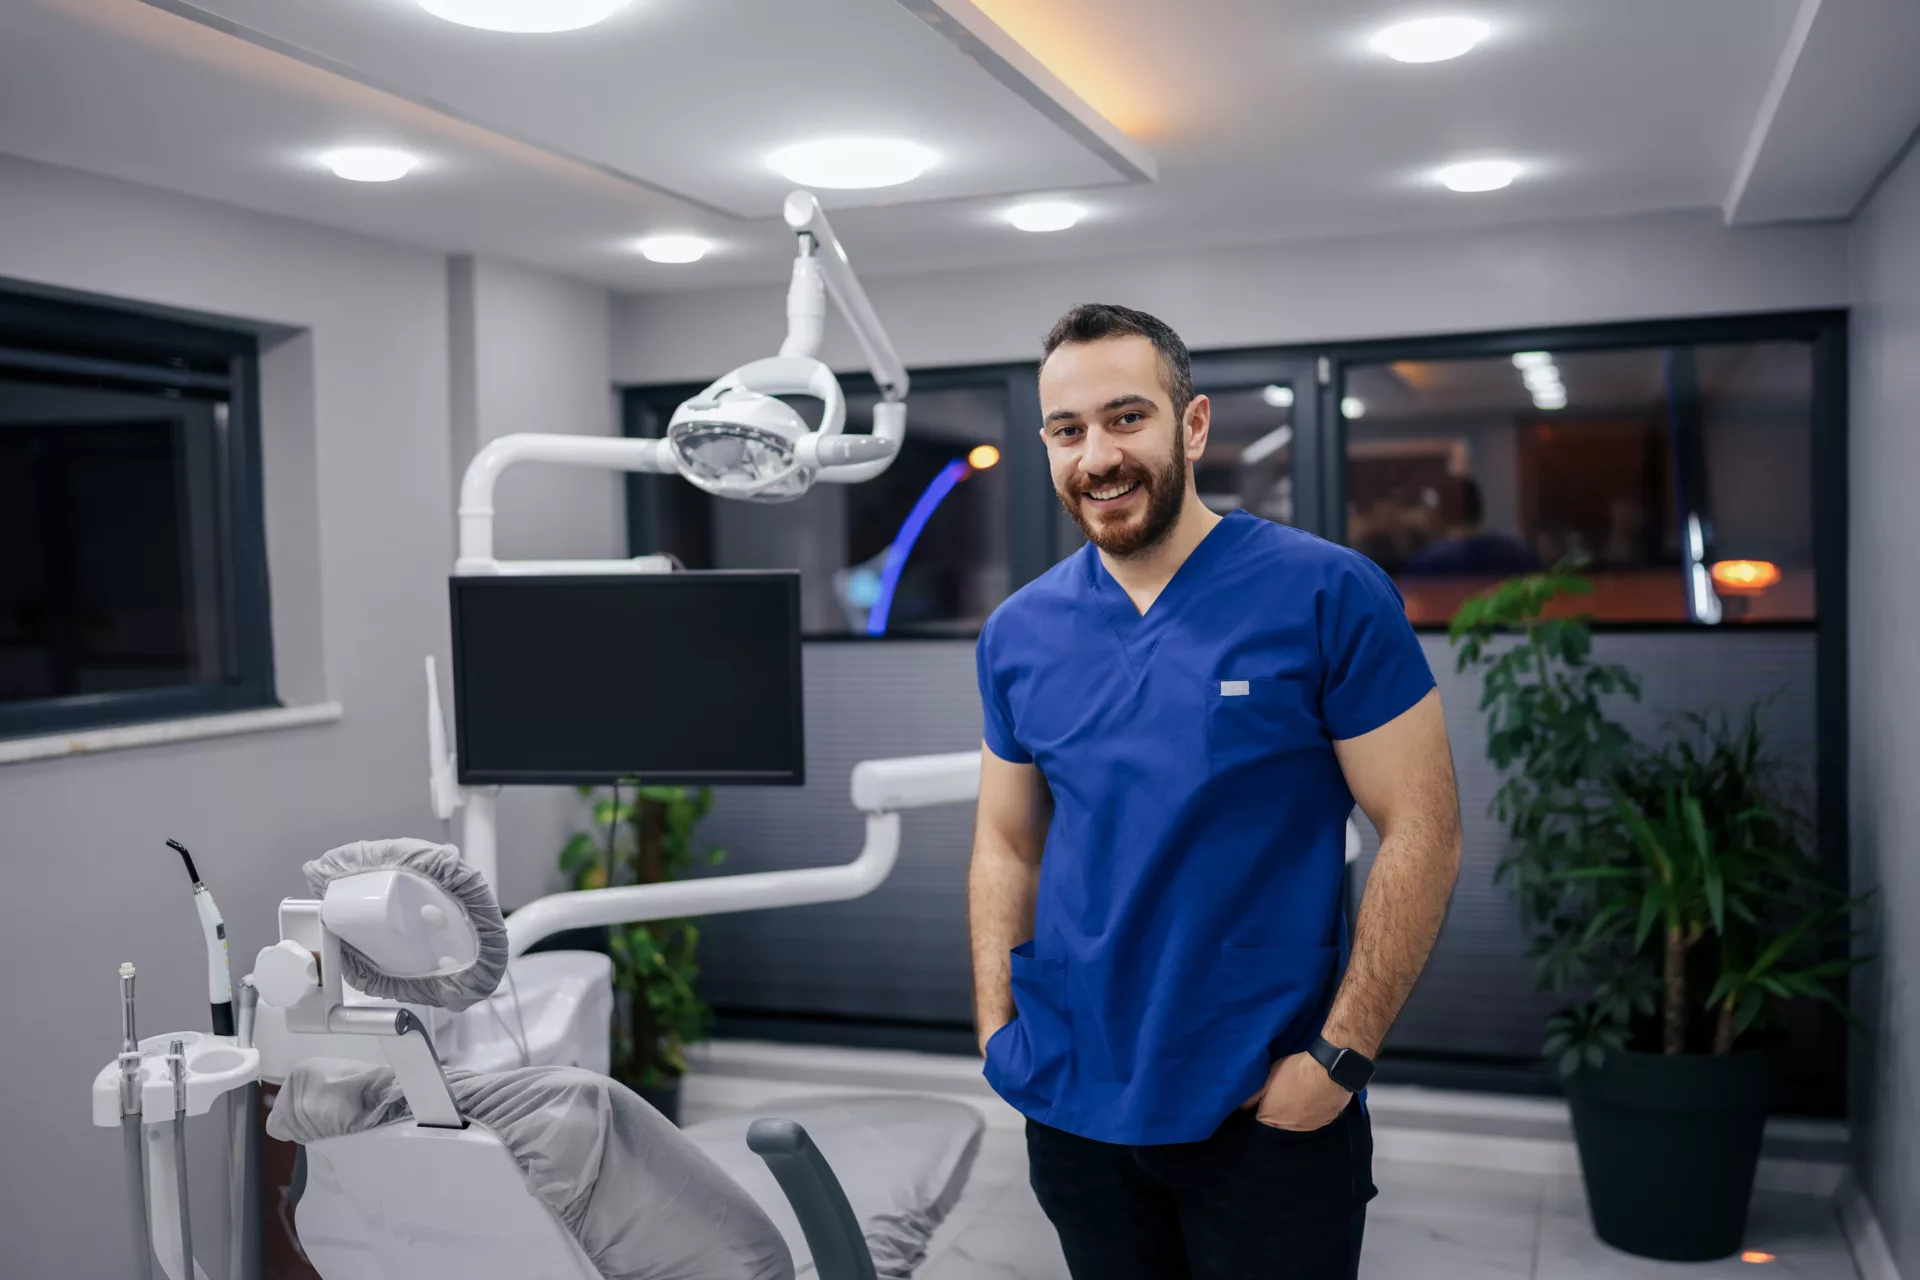 Man in blue shirt standing by dental chair.